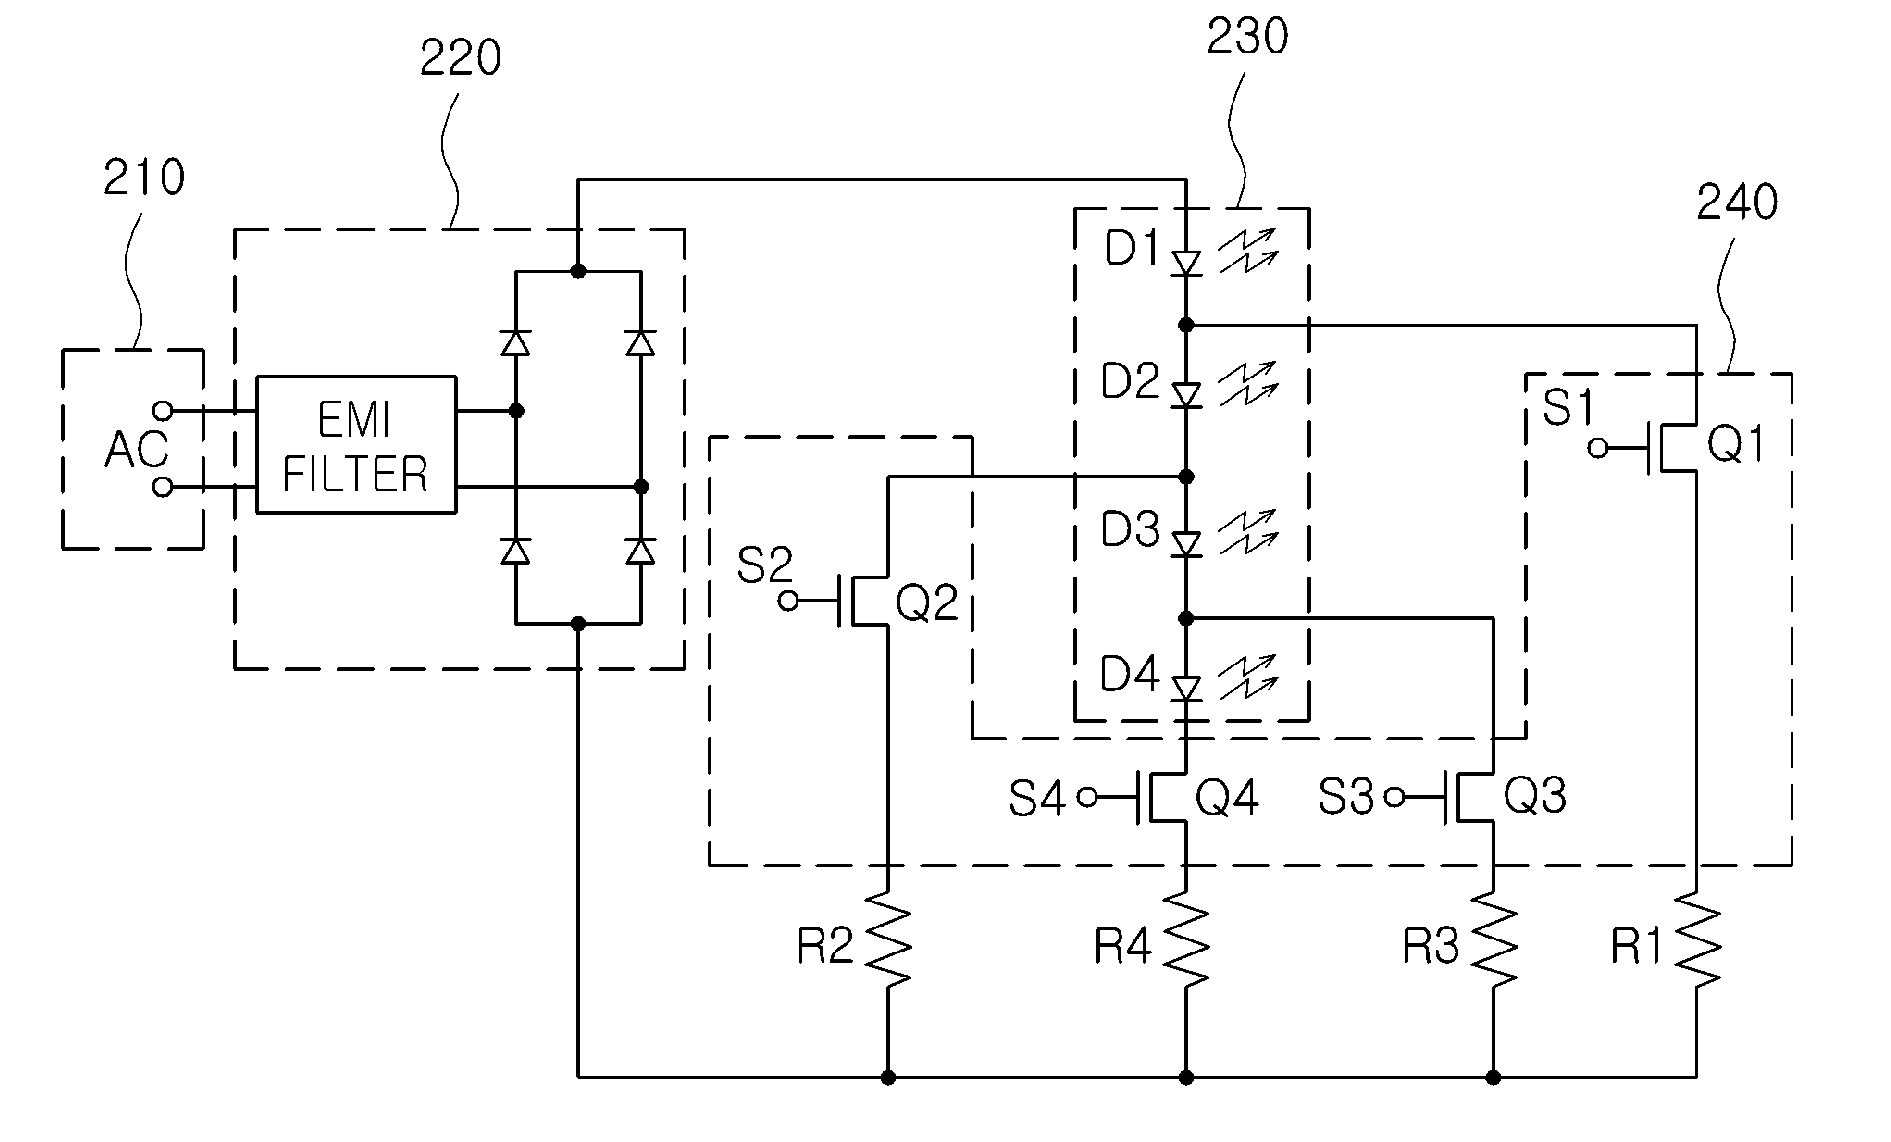 LED driving apparatus and method